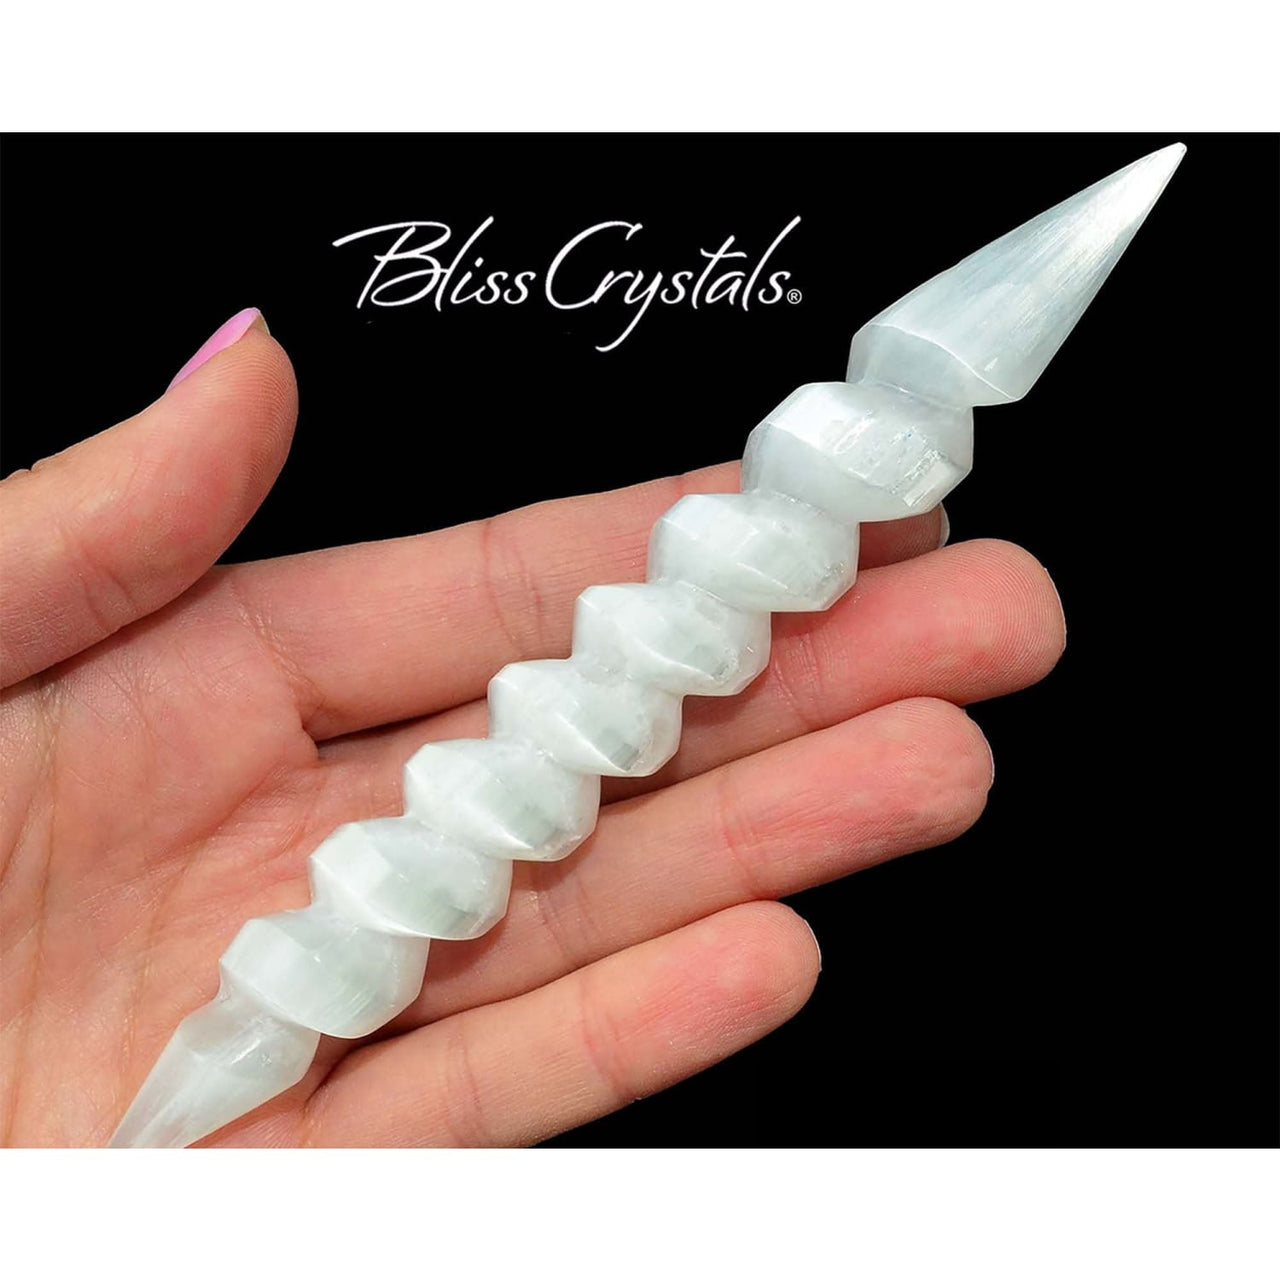 1 SELENITE WAND Spiral Double Terminated Design Crystal 